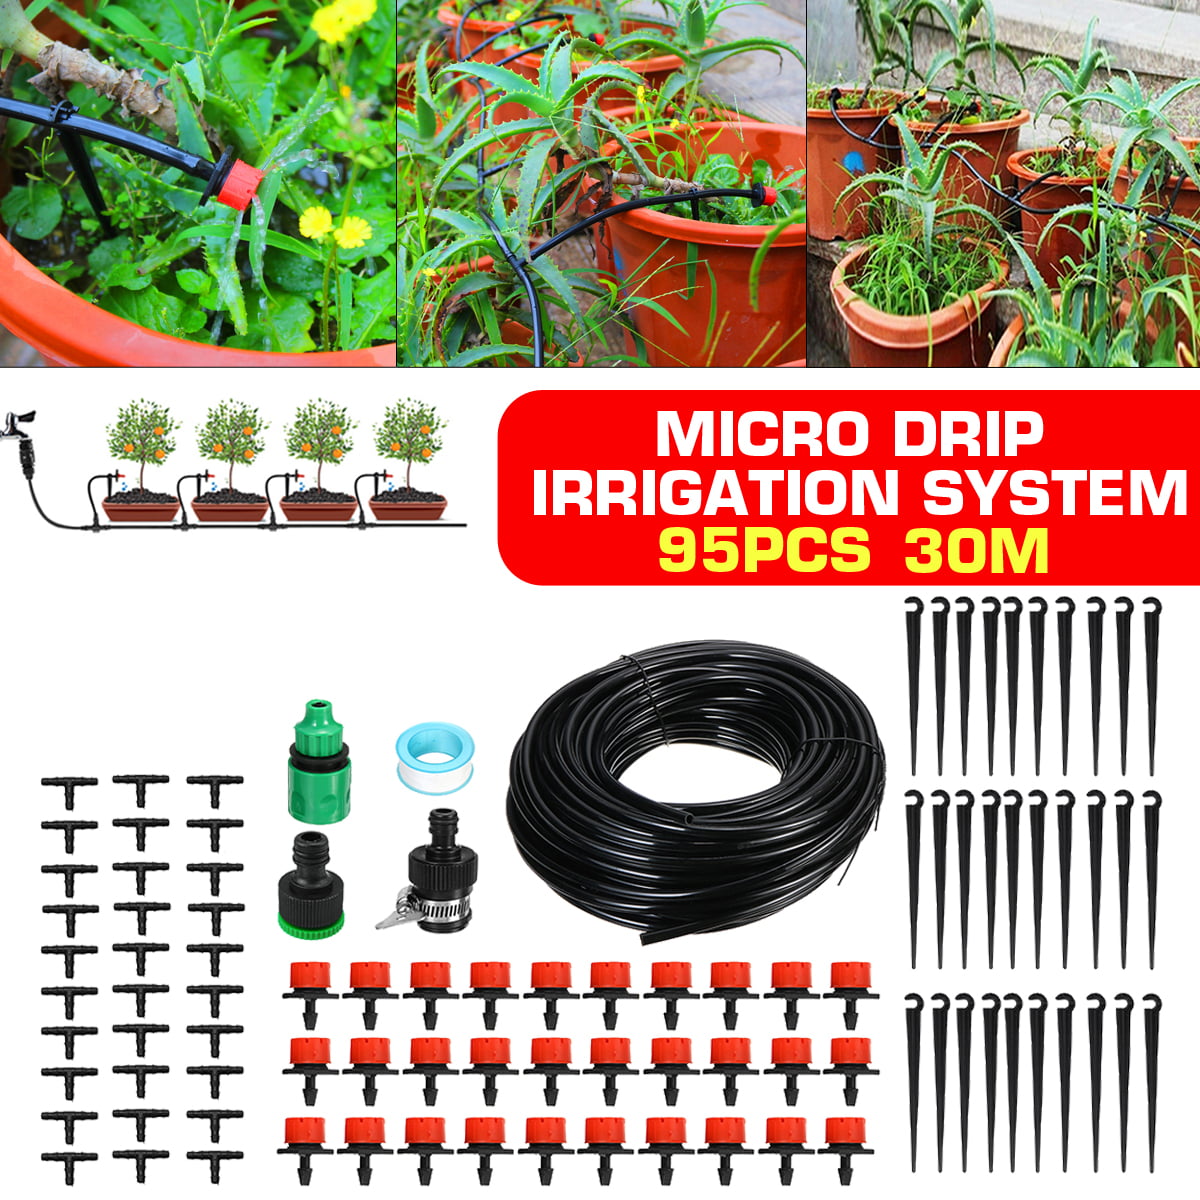 US Auto Timer Plant Water Drip Irrigation Tool DIY Watering System Garden Hose 